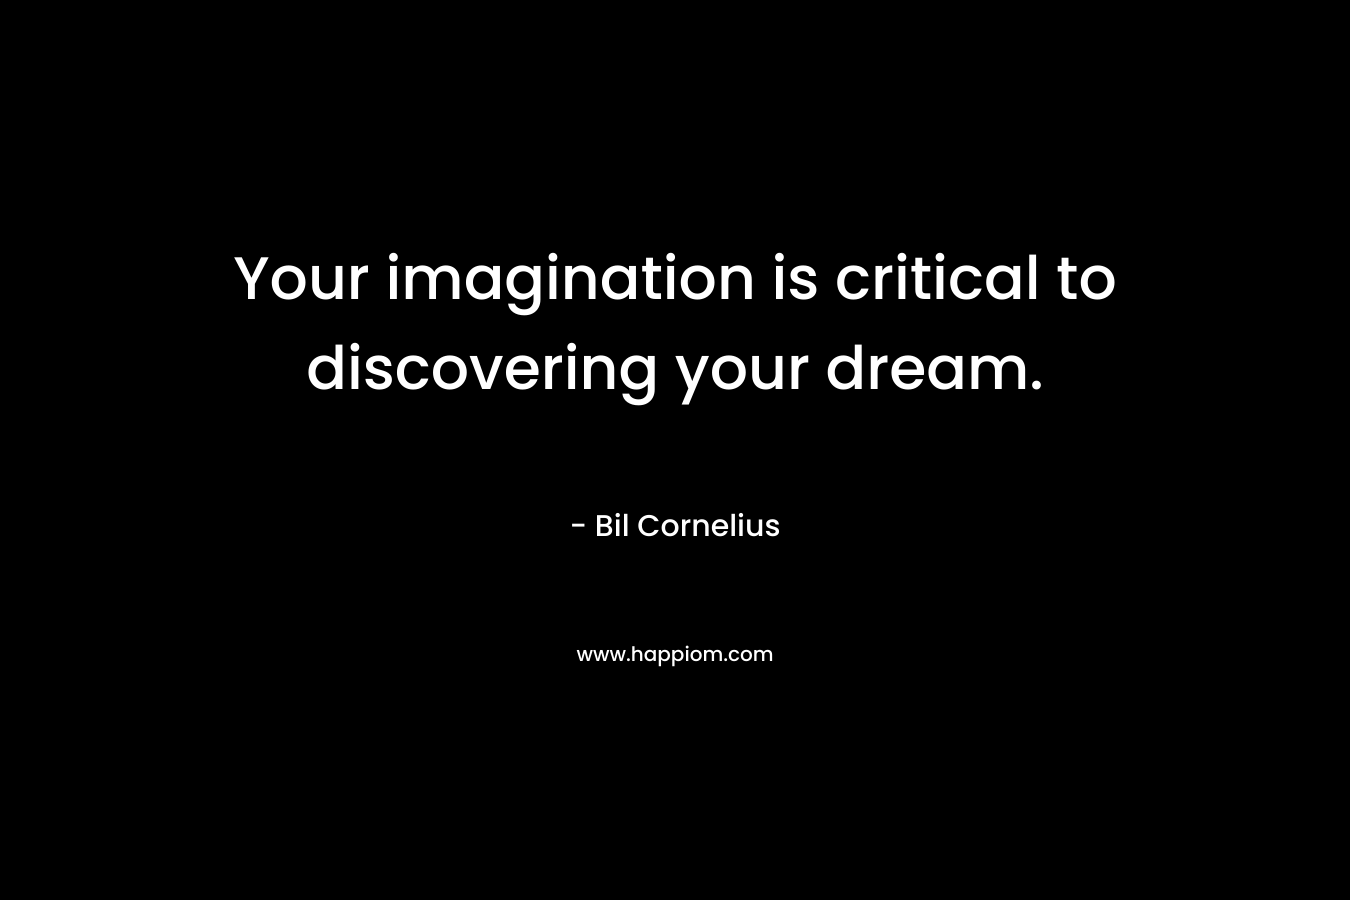 Your imagination is critical to discovering your dream.